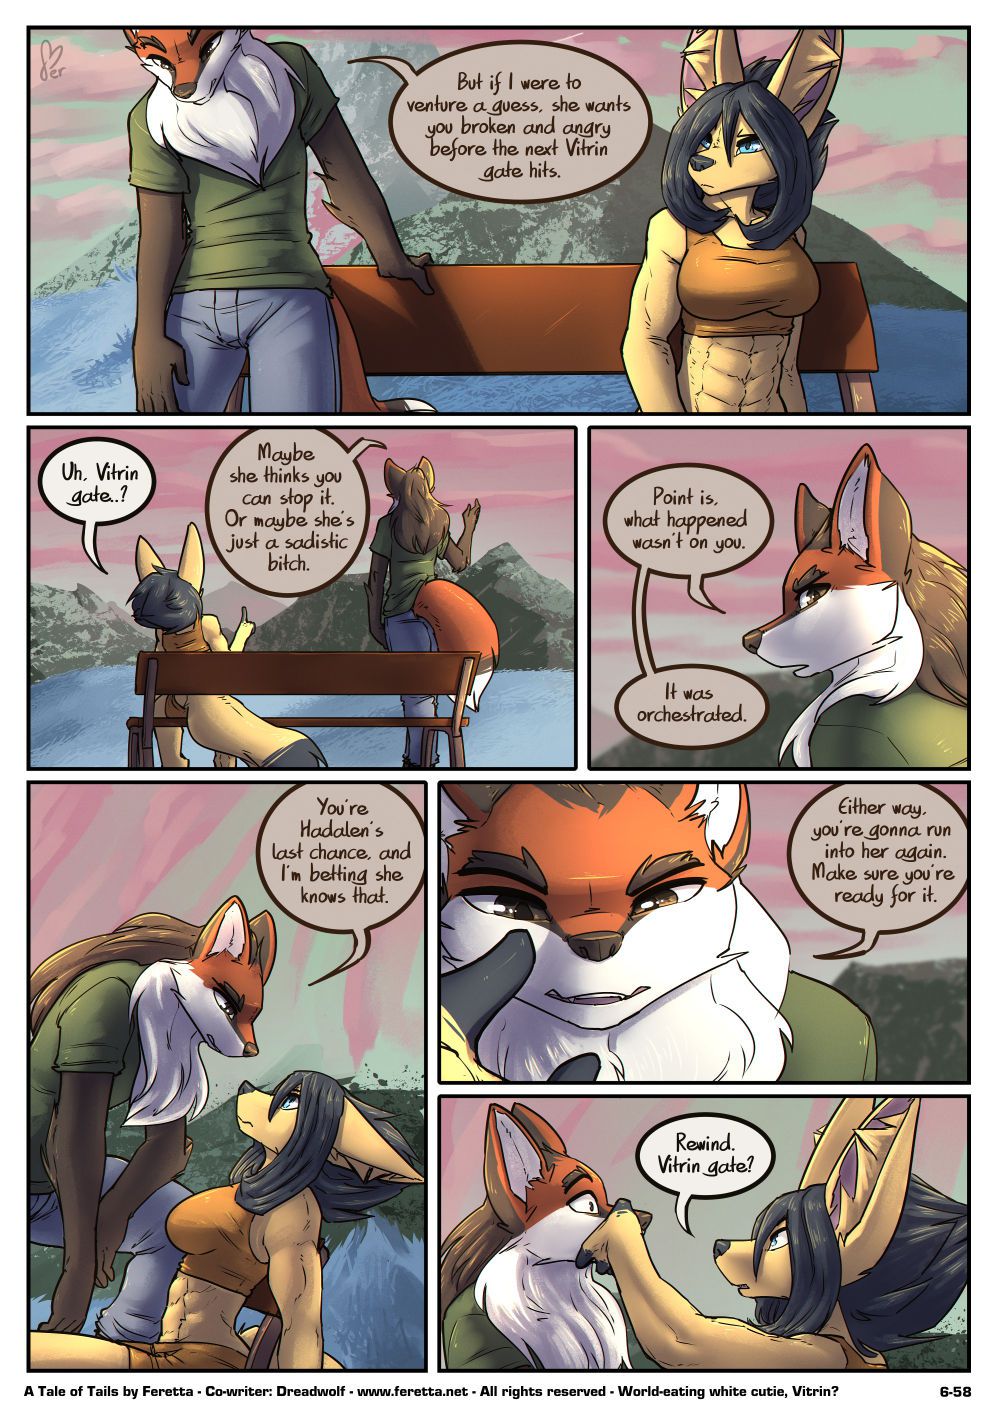 [Feretta] A Tale of Tails: Chapter 6 - Paths converge (ongoing) 60